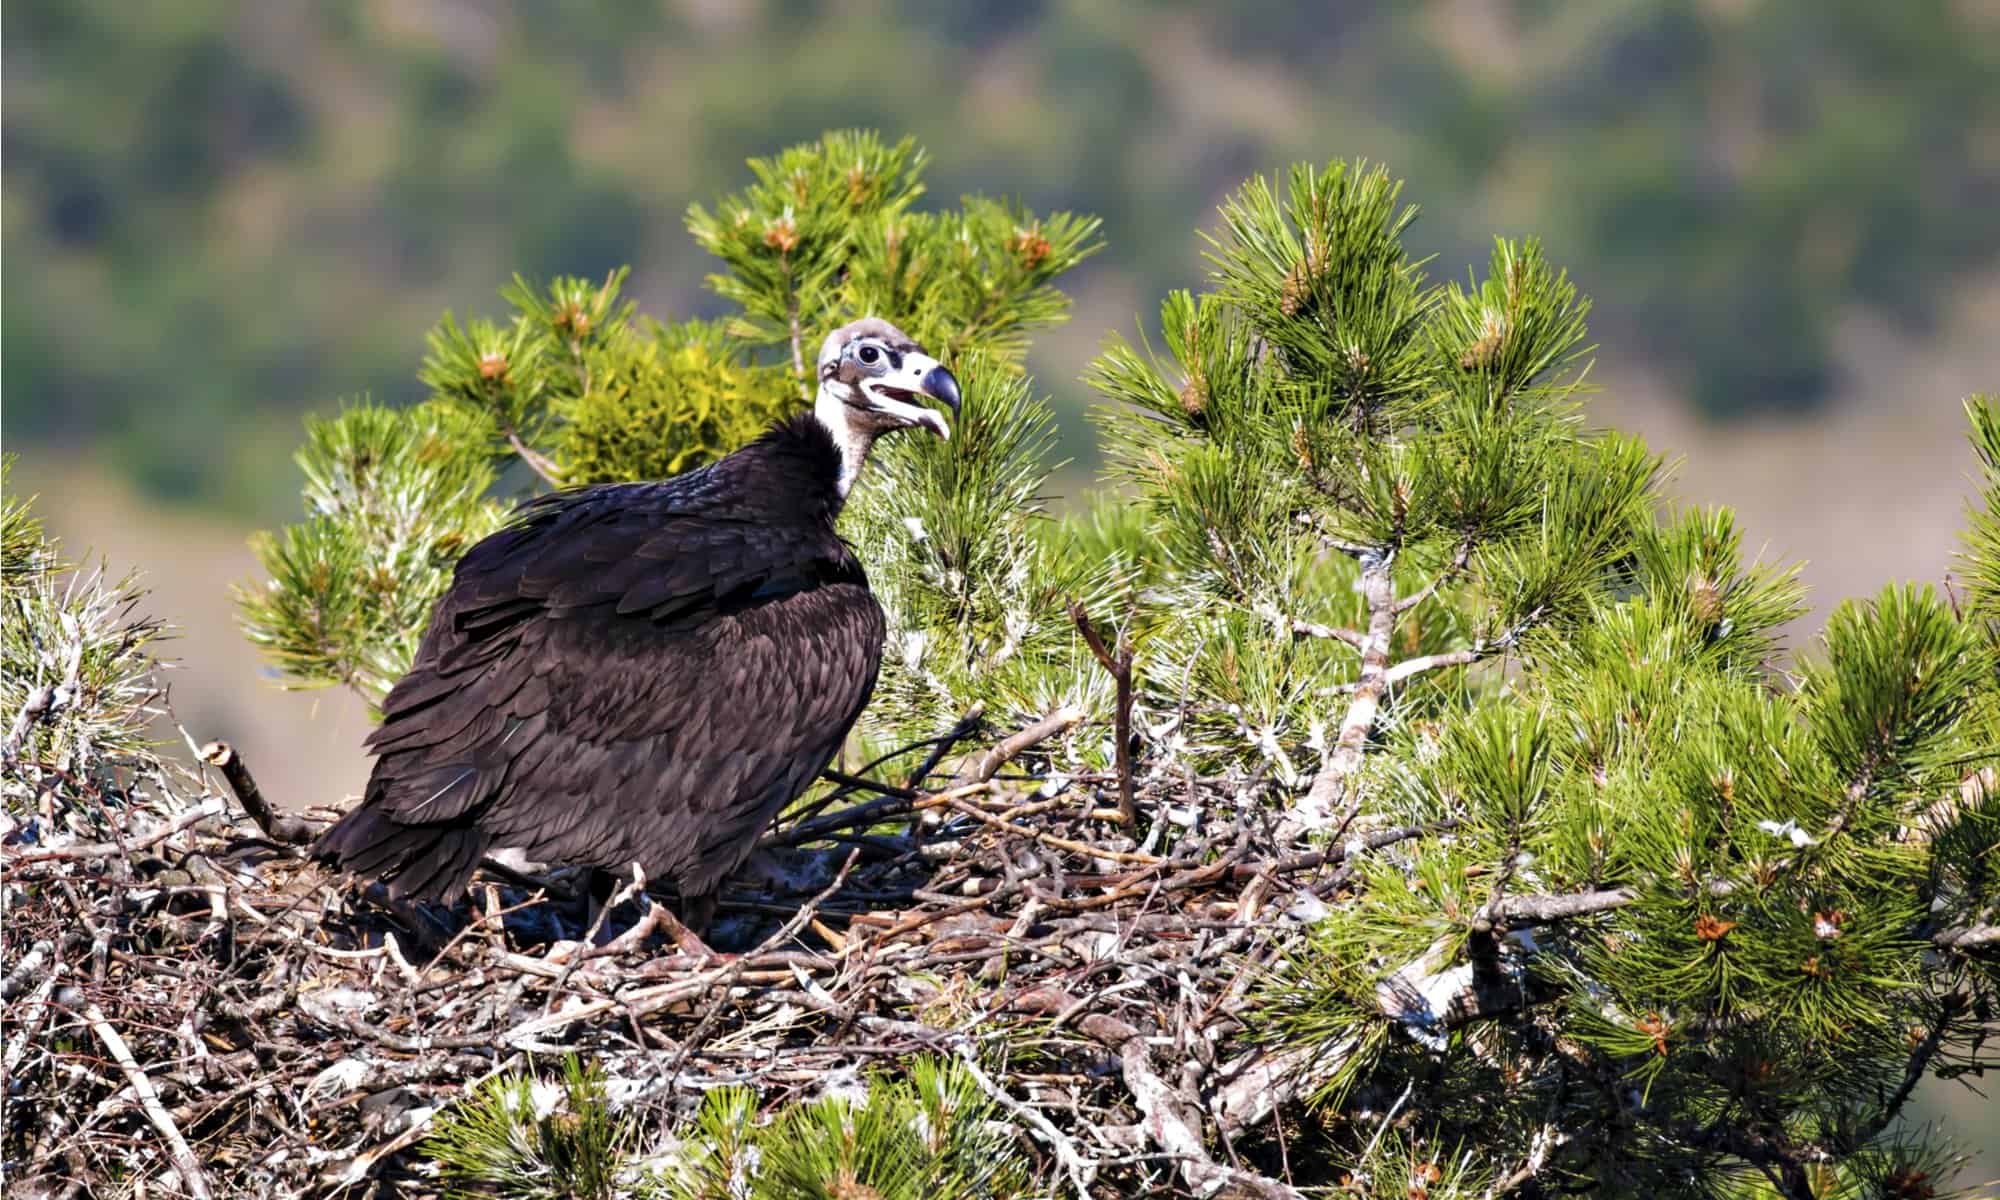 Gray vultures build a large nest, usually in an old tree or on the edge of a cliff.